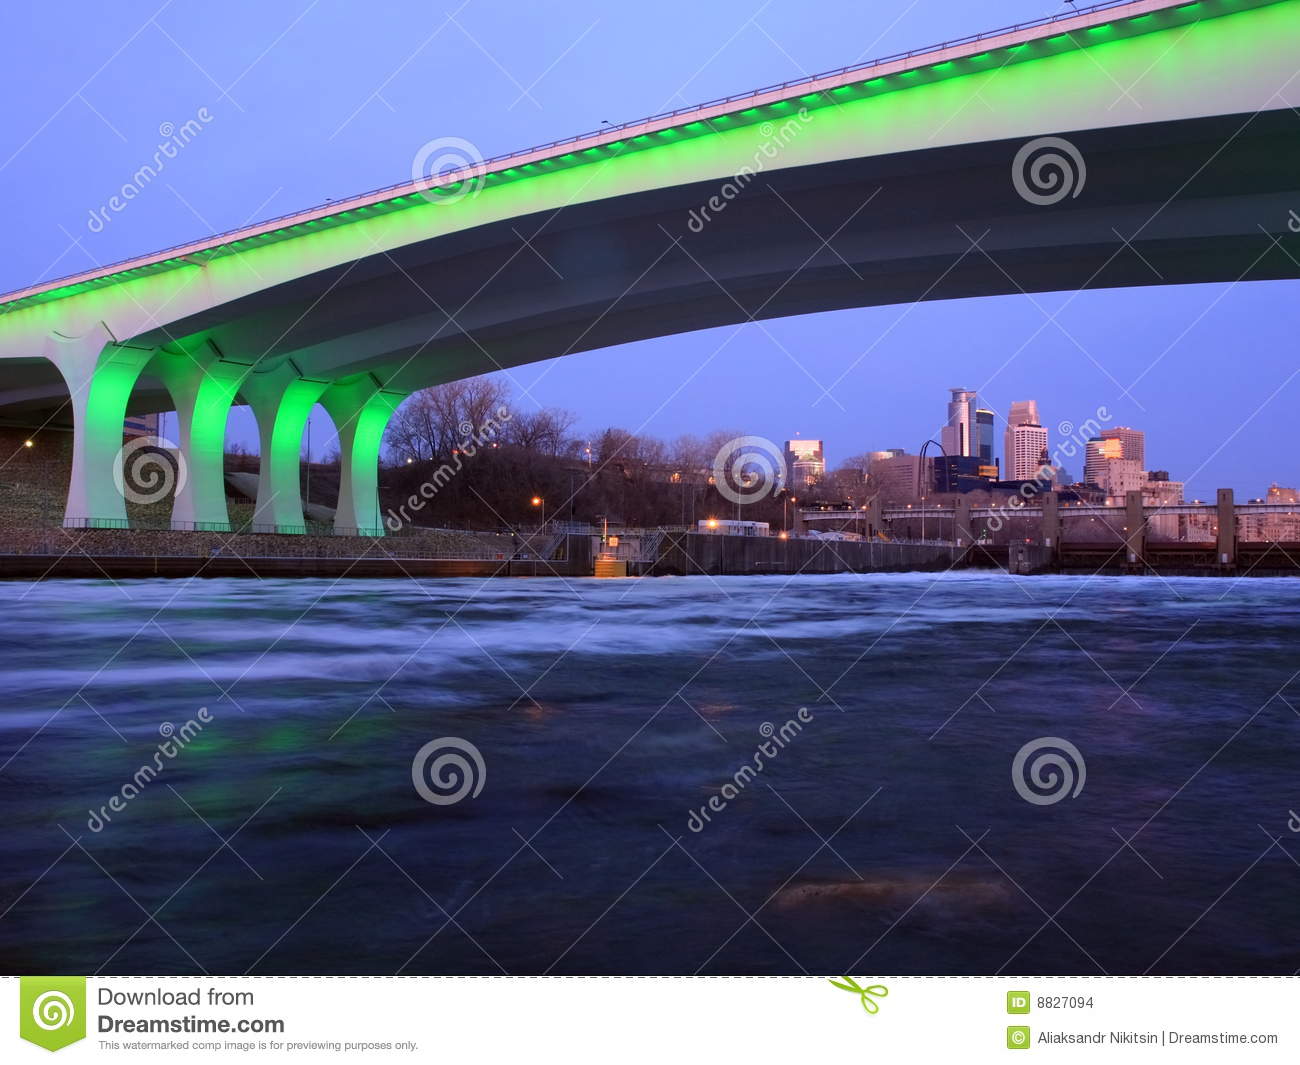 Highway 35w In Minneapolis Stock Images   Image  8827094